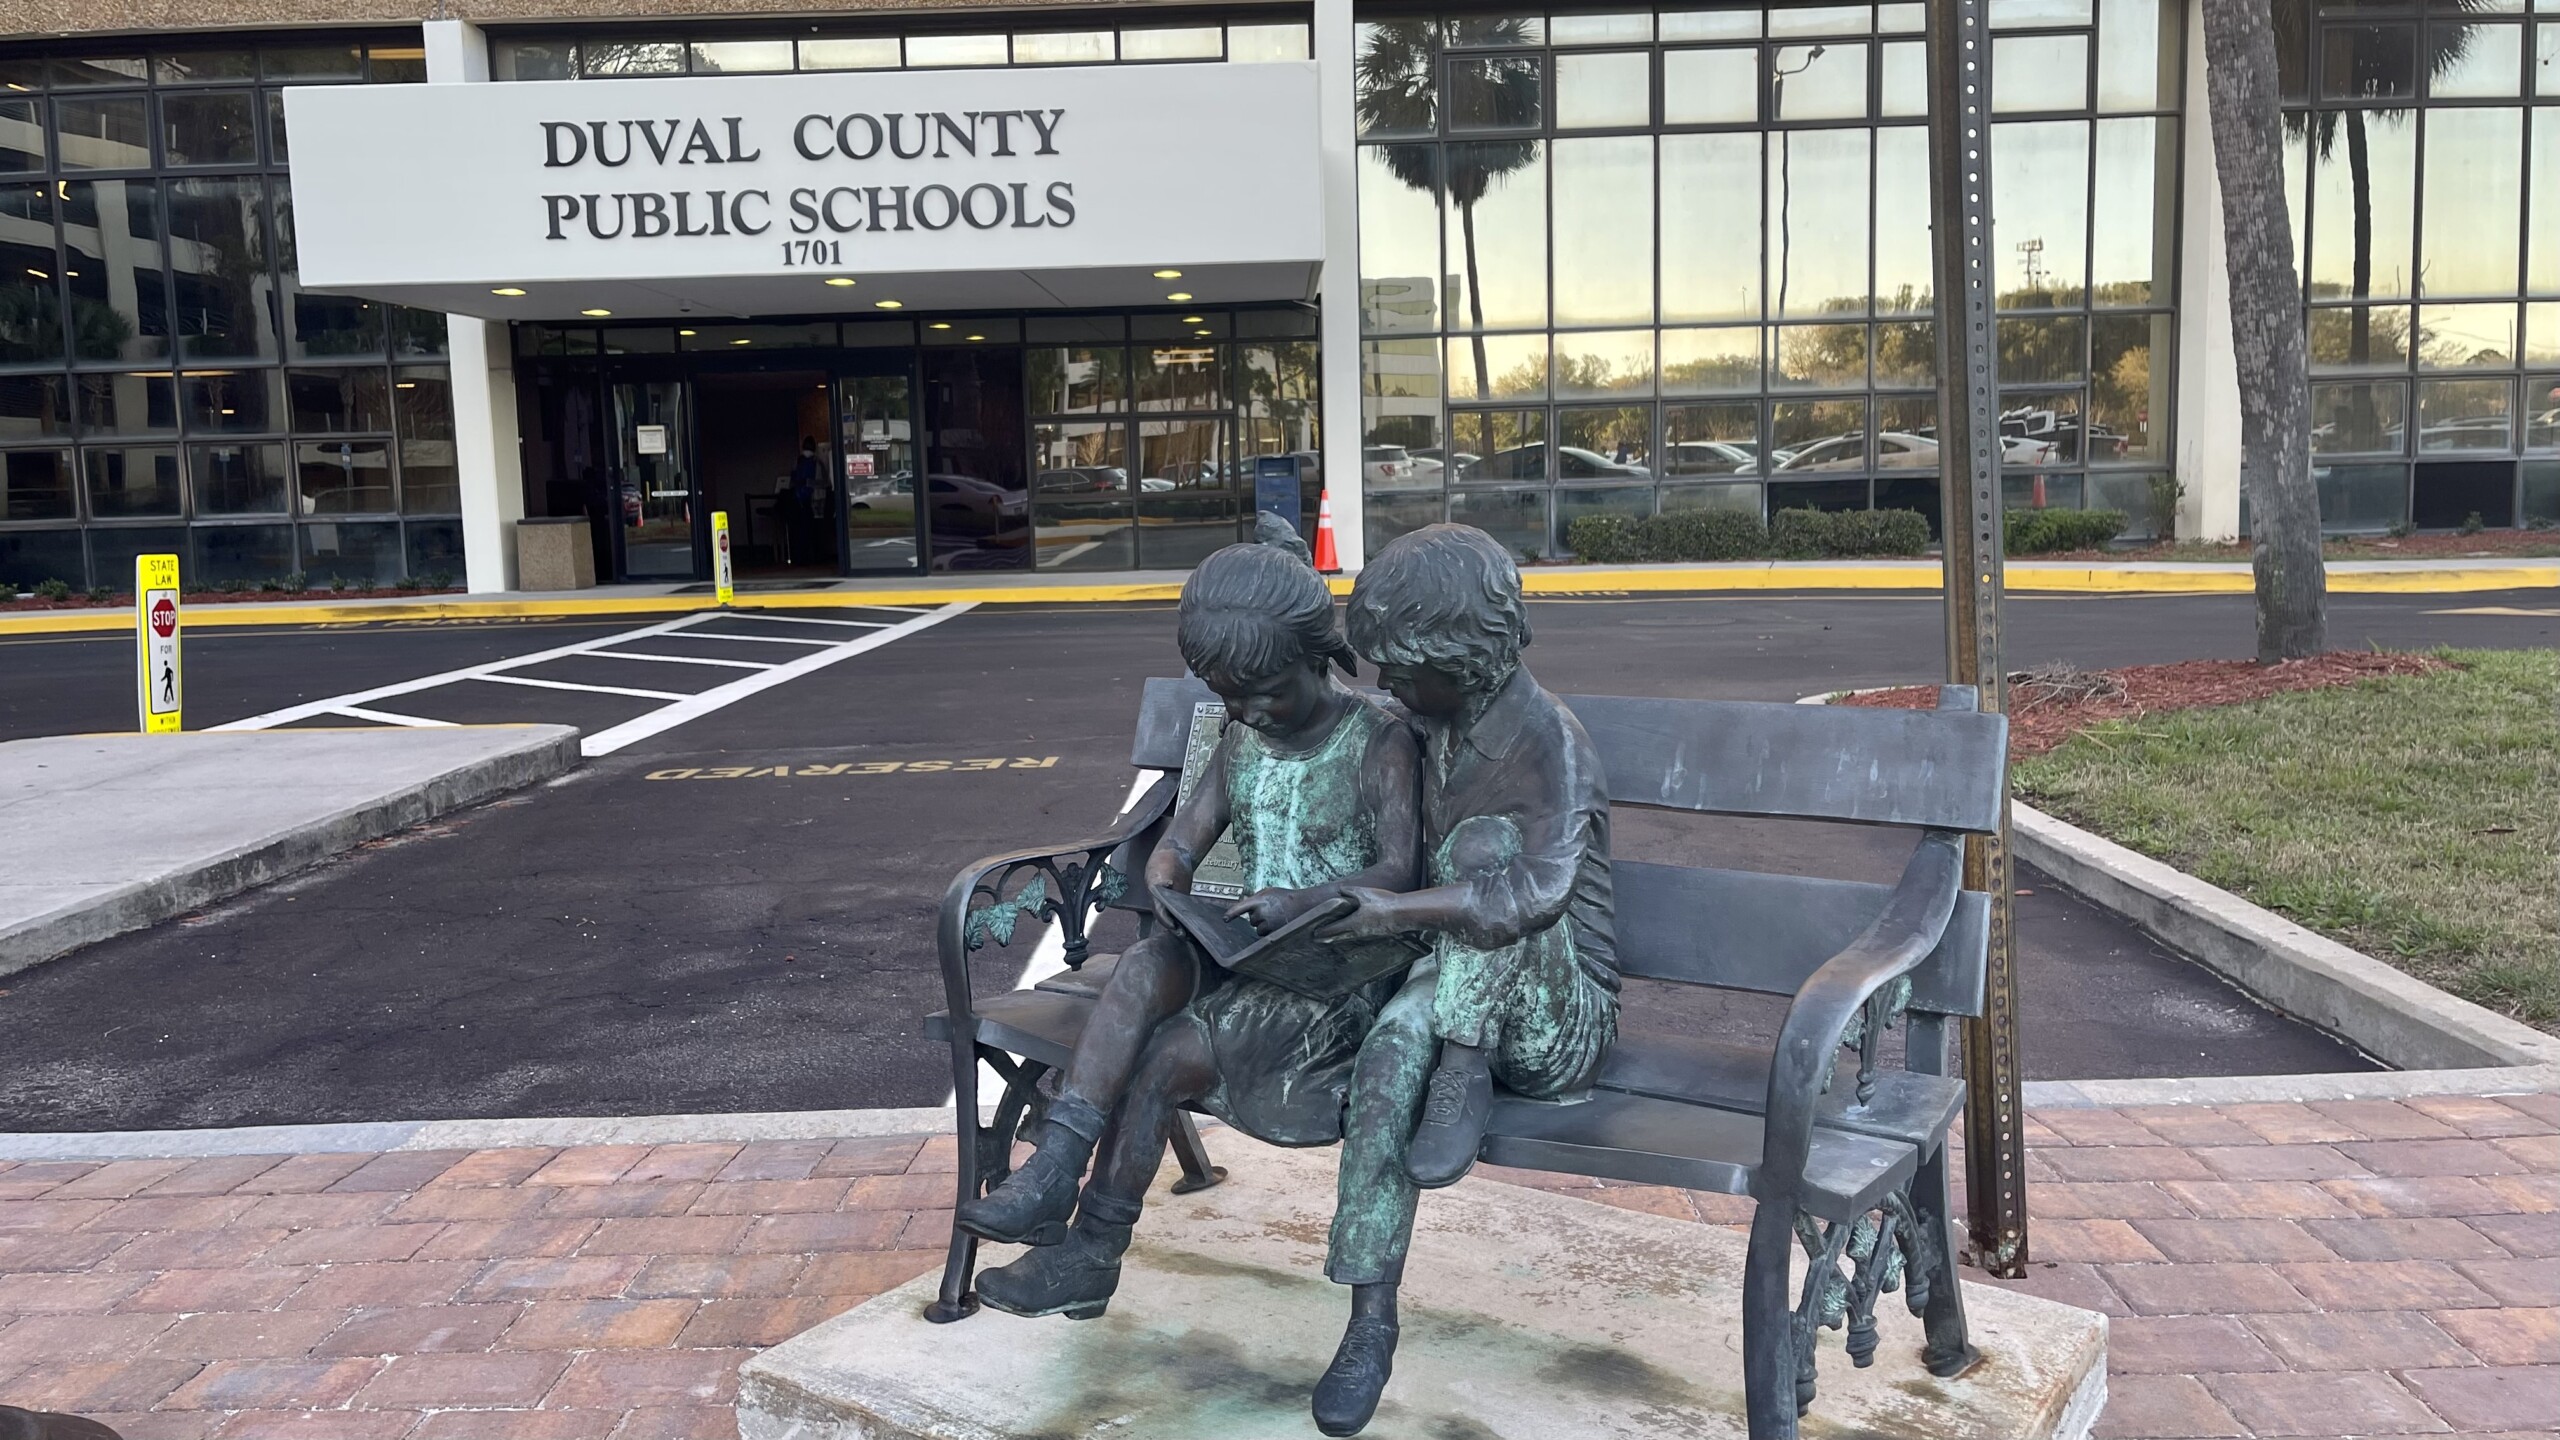 Duval County Public Schools administration building, with a bronze statue of children reading in front of it.